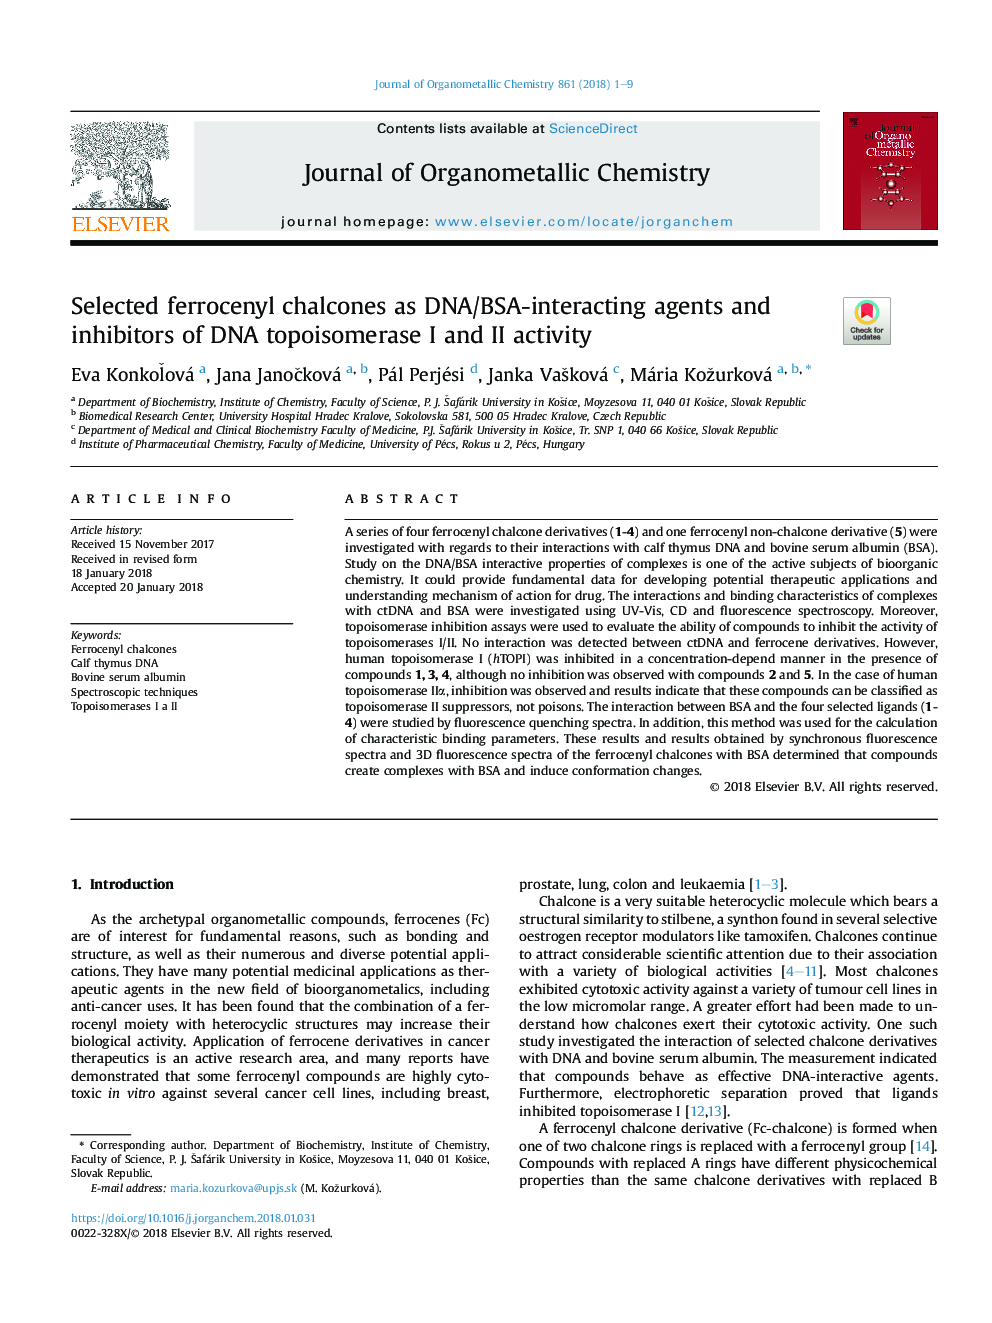 Selected ferrocenyl chalcones as DNA/BSA-interacting agents and inhibitors of DNA topoisomerase I and II activity